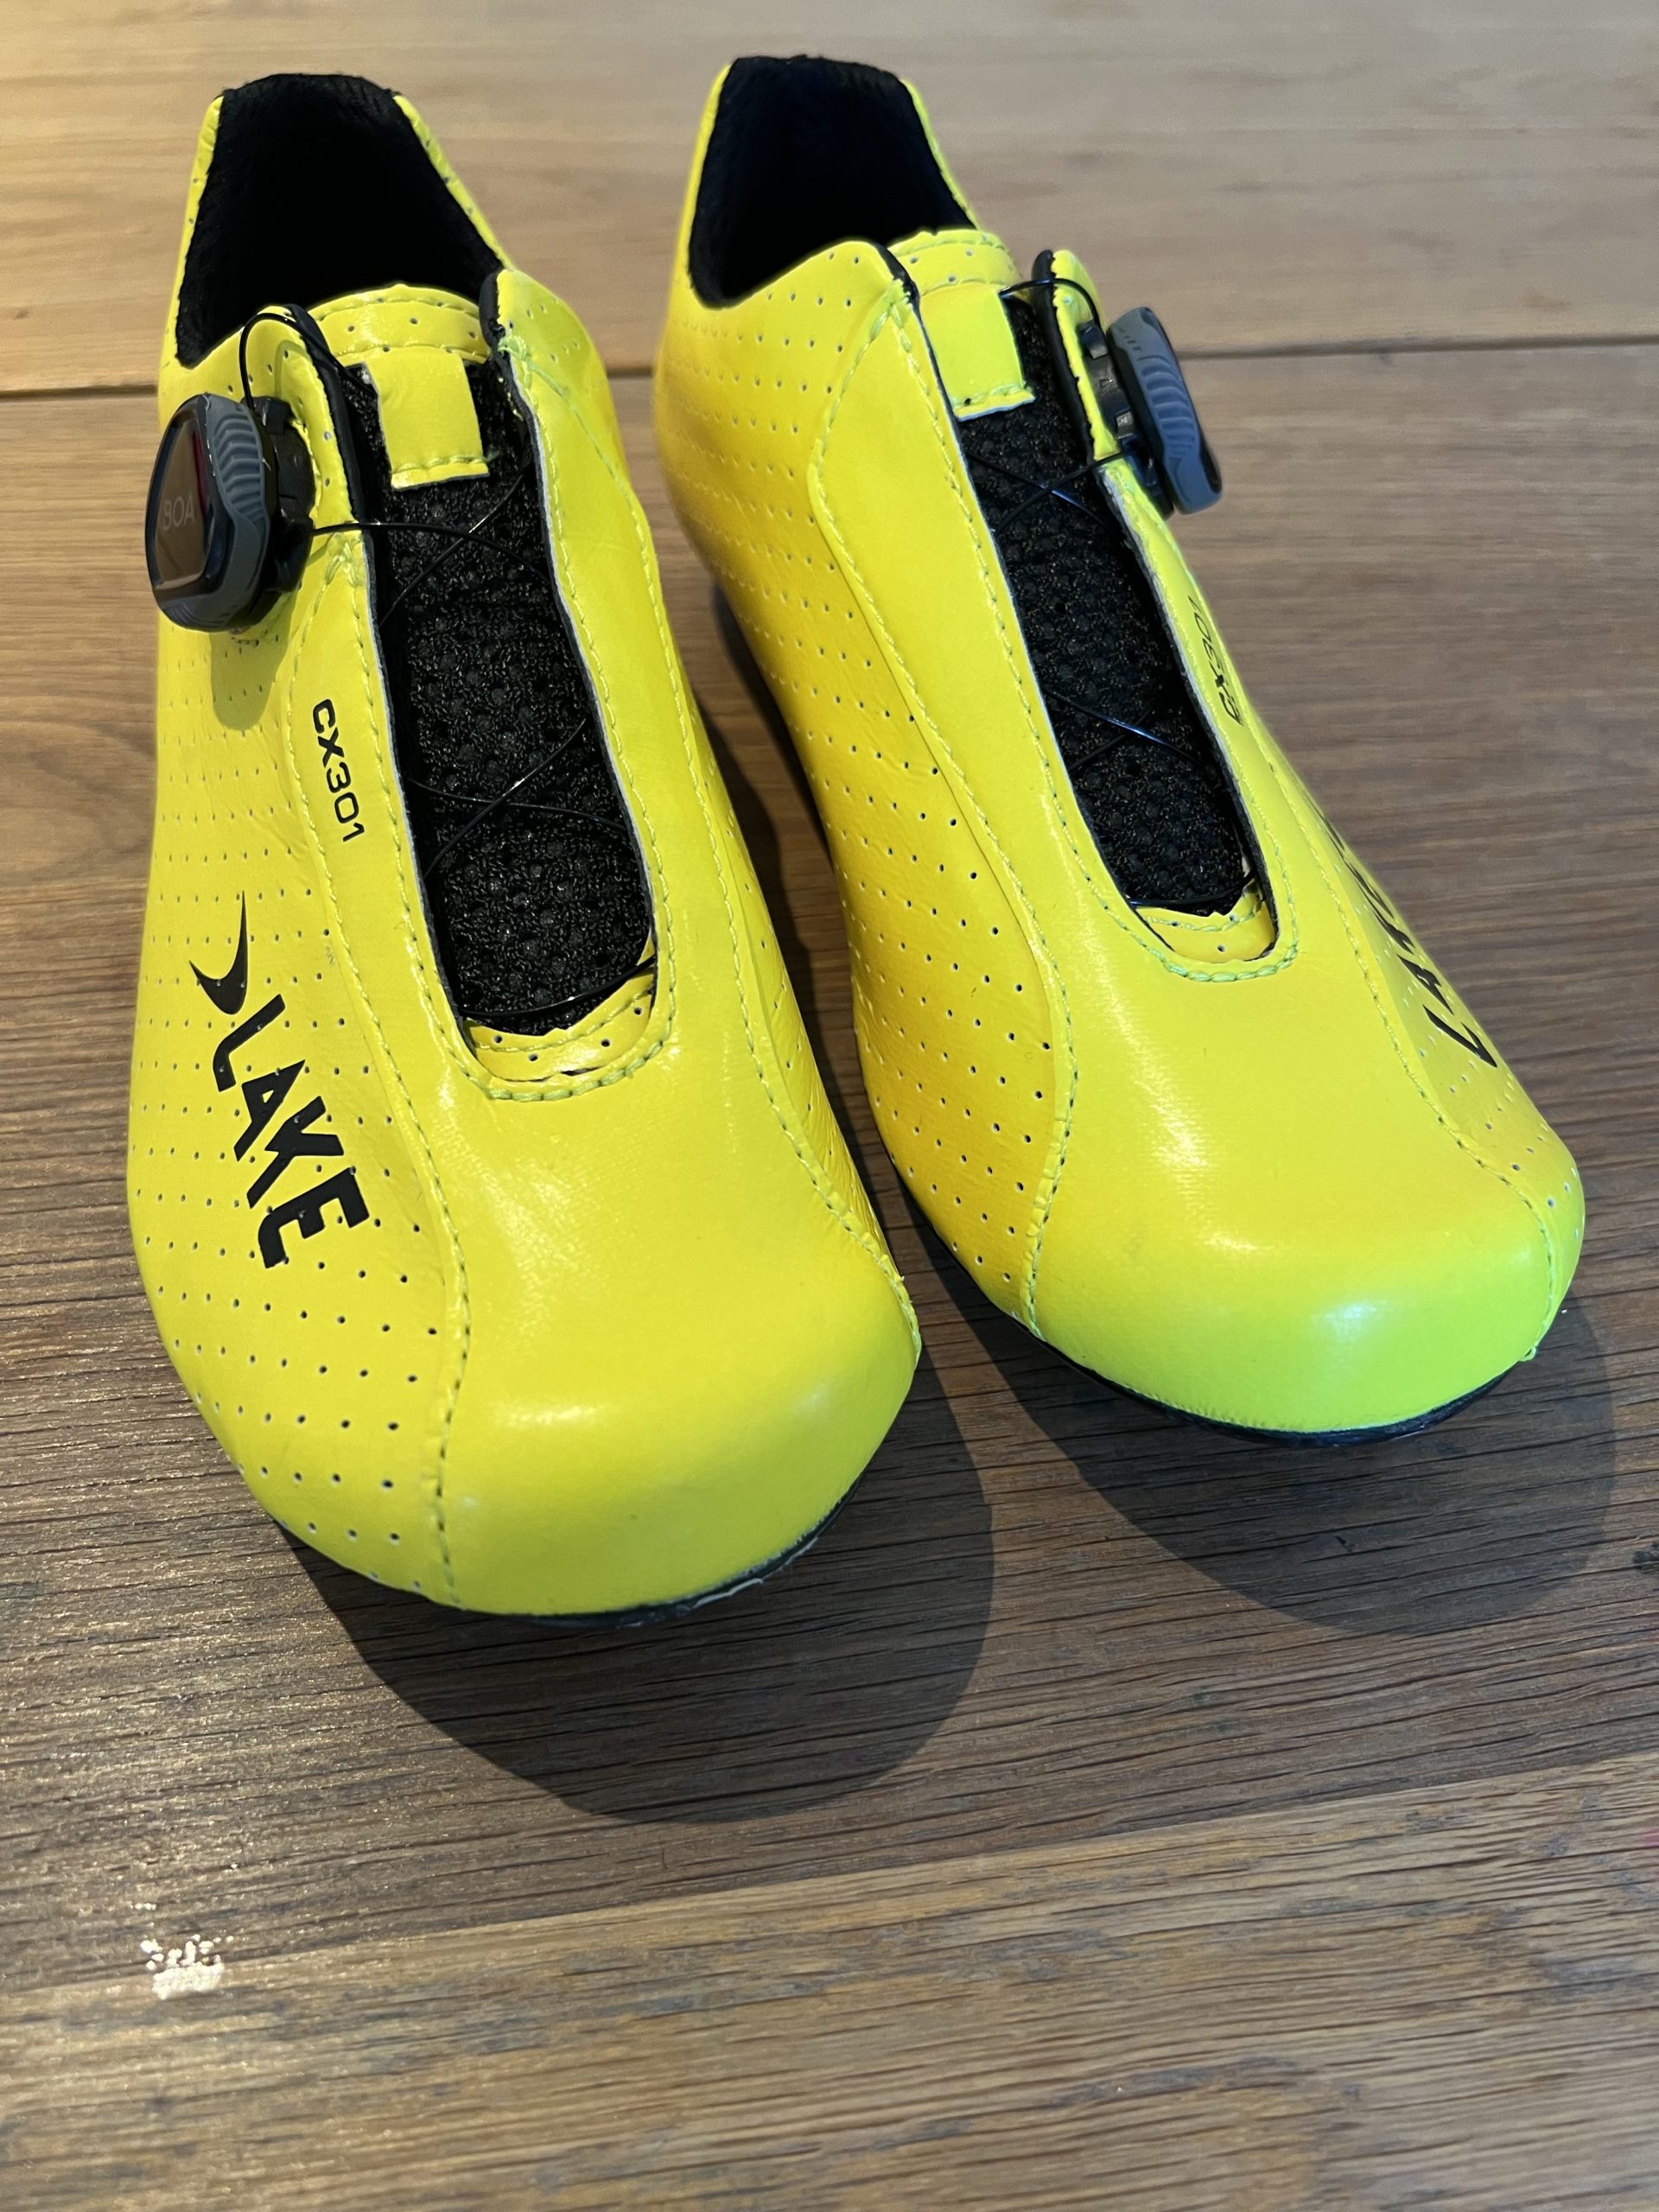 Lake CX301 - Yellow - EU39.5 Wide - Classifieds by Escape Collective